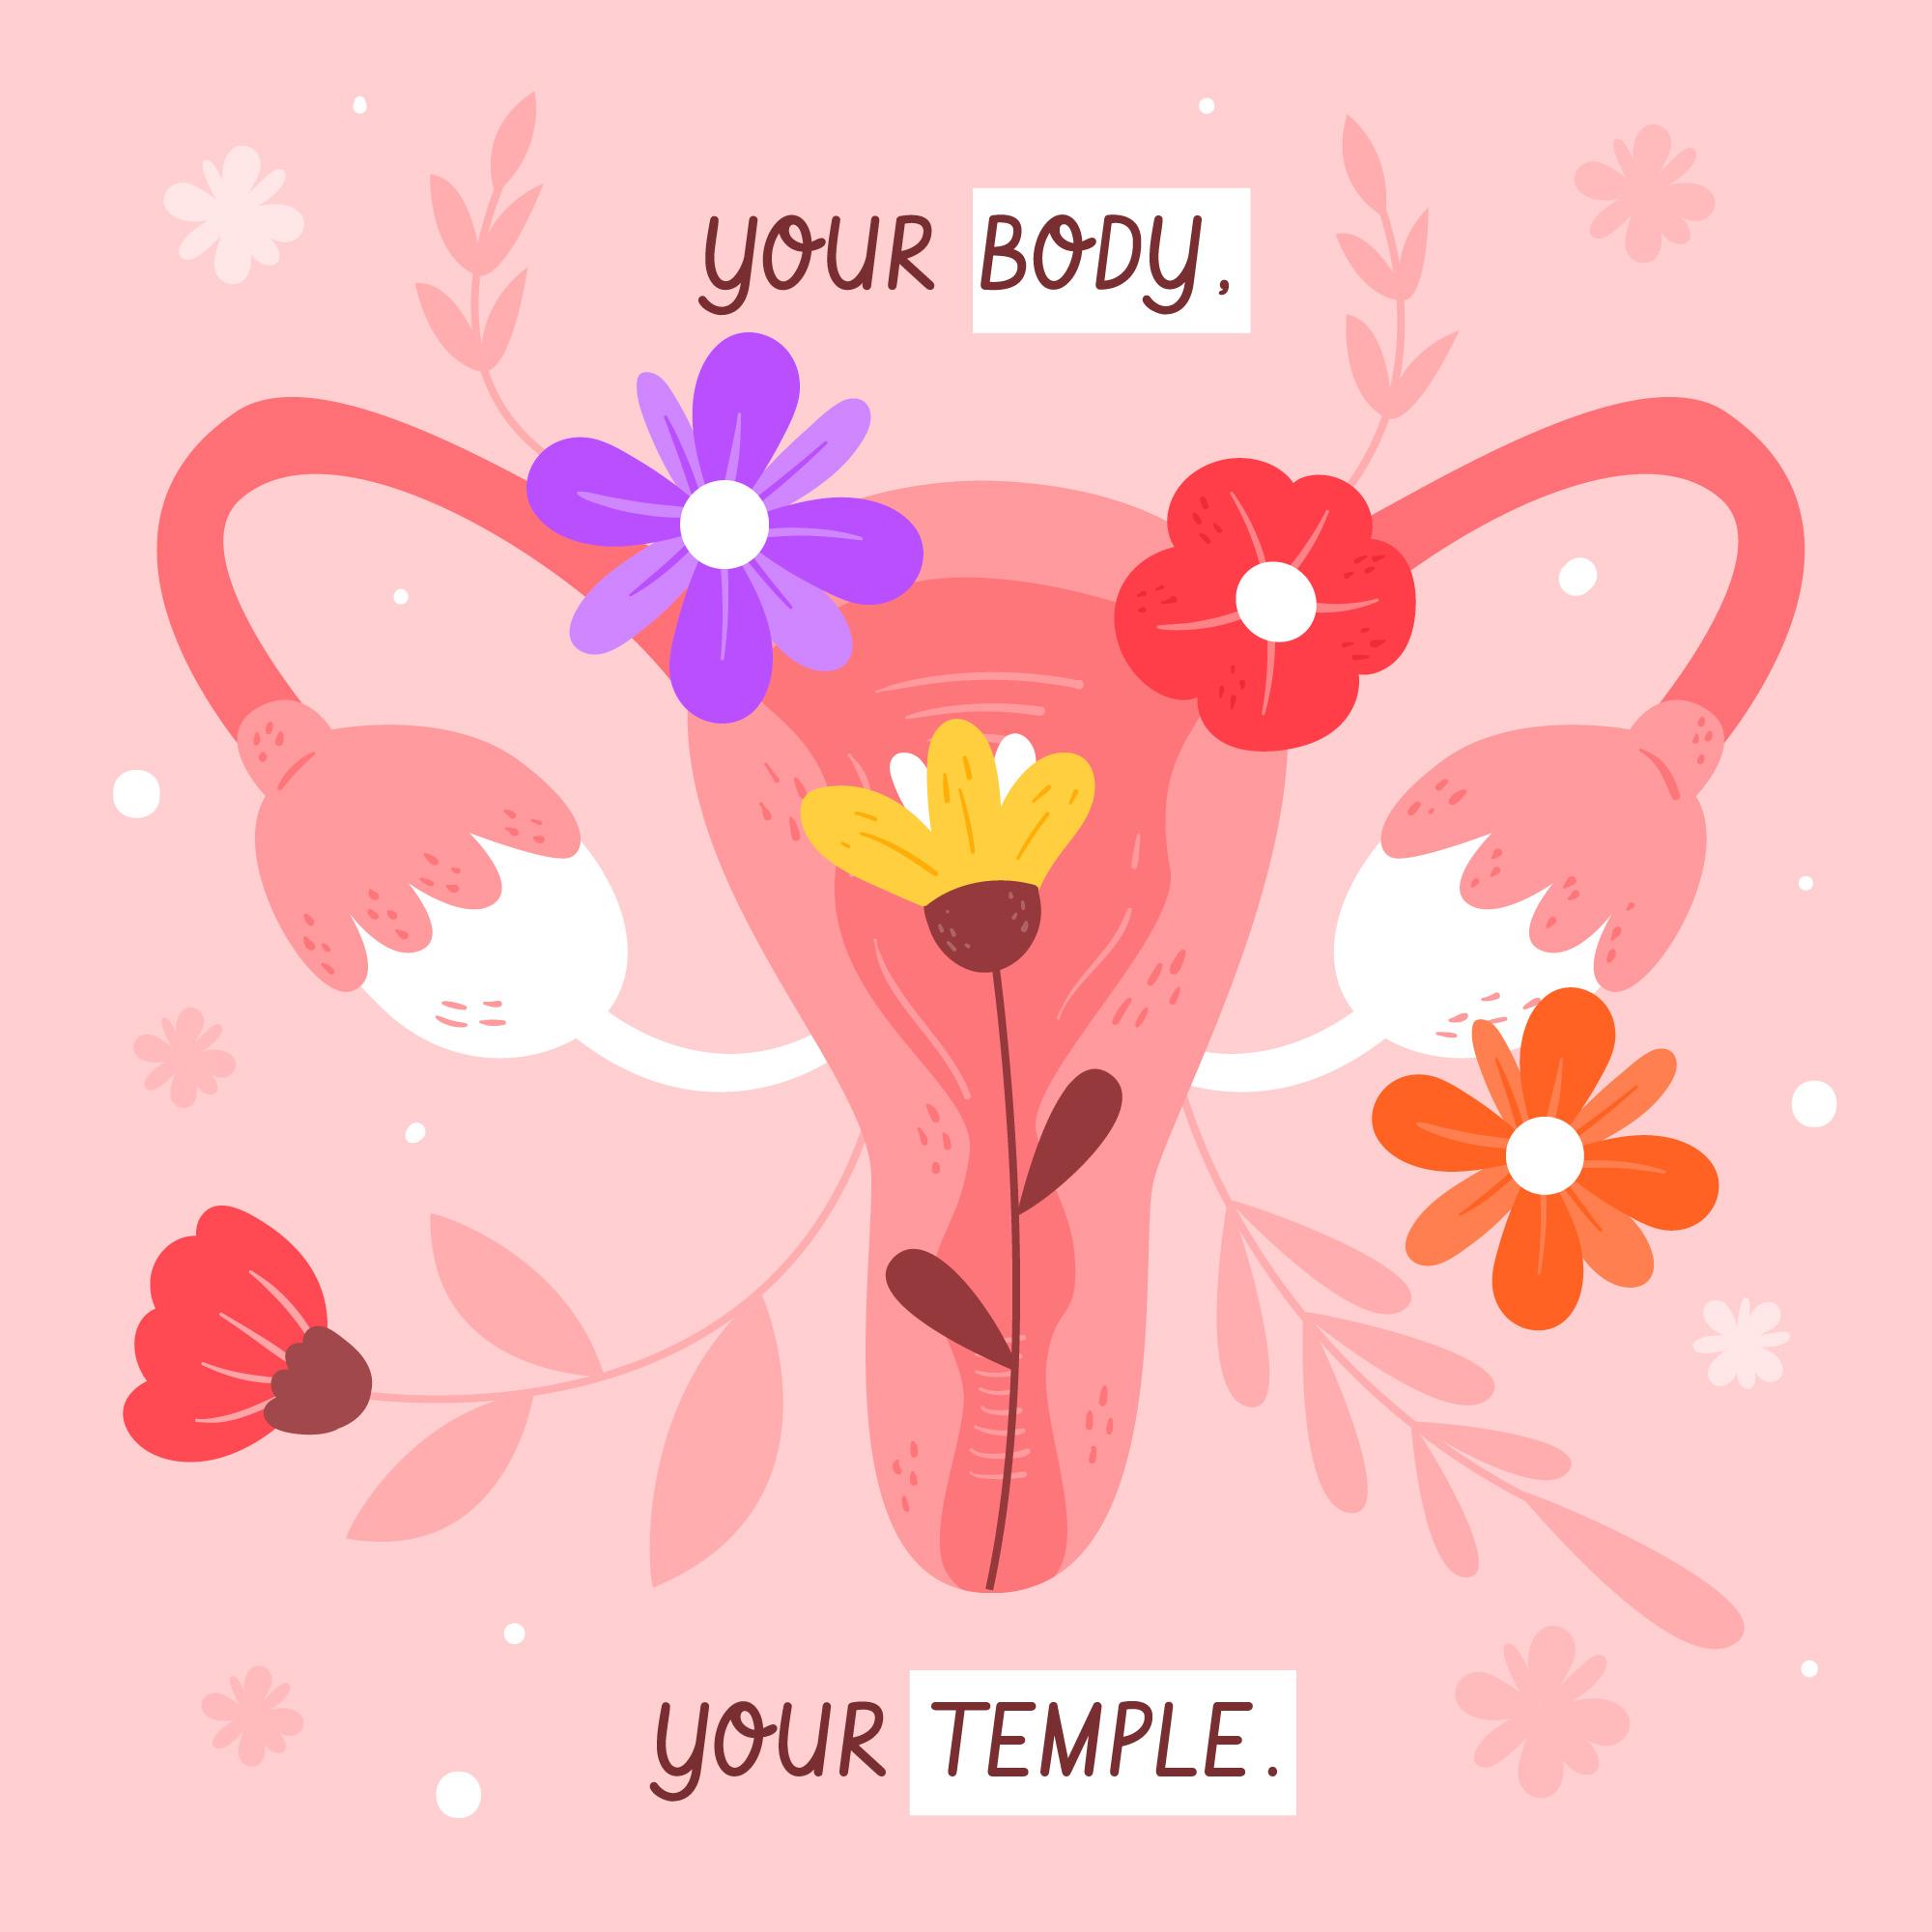 CONCLUSION: your body, your temple